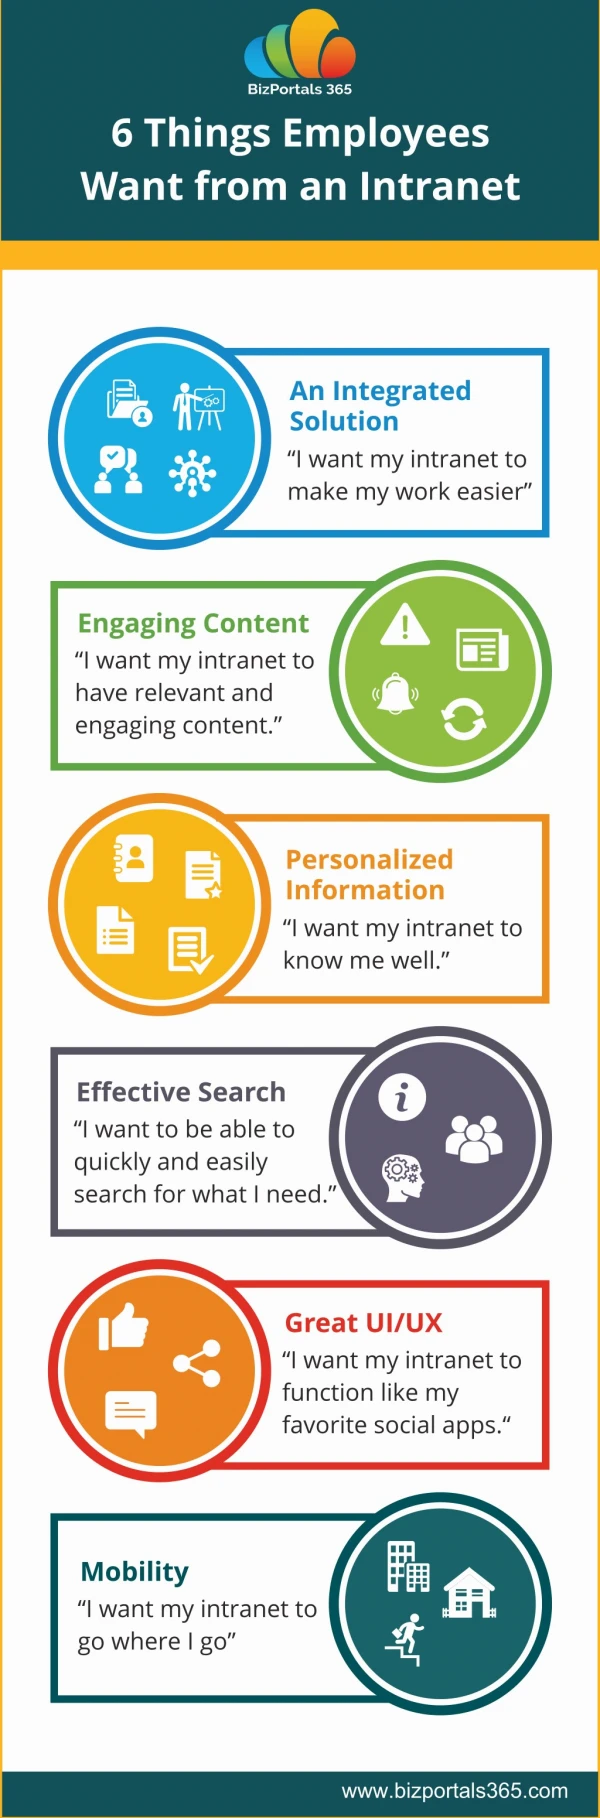 Six Things Employees Want from an Intranet